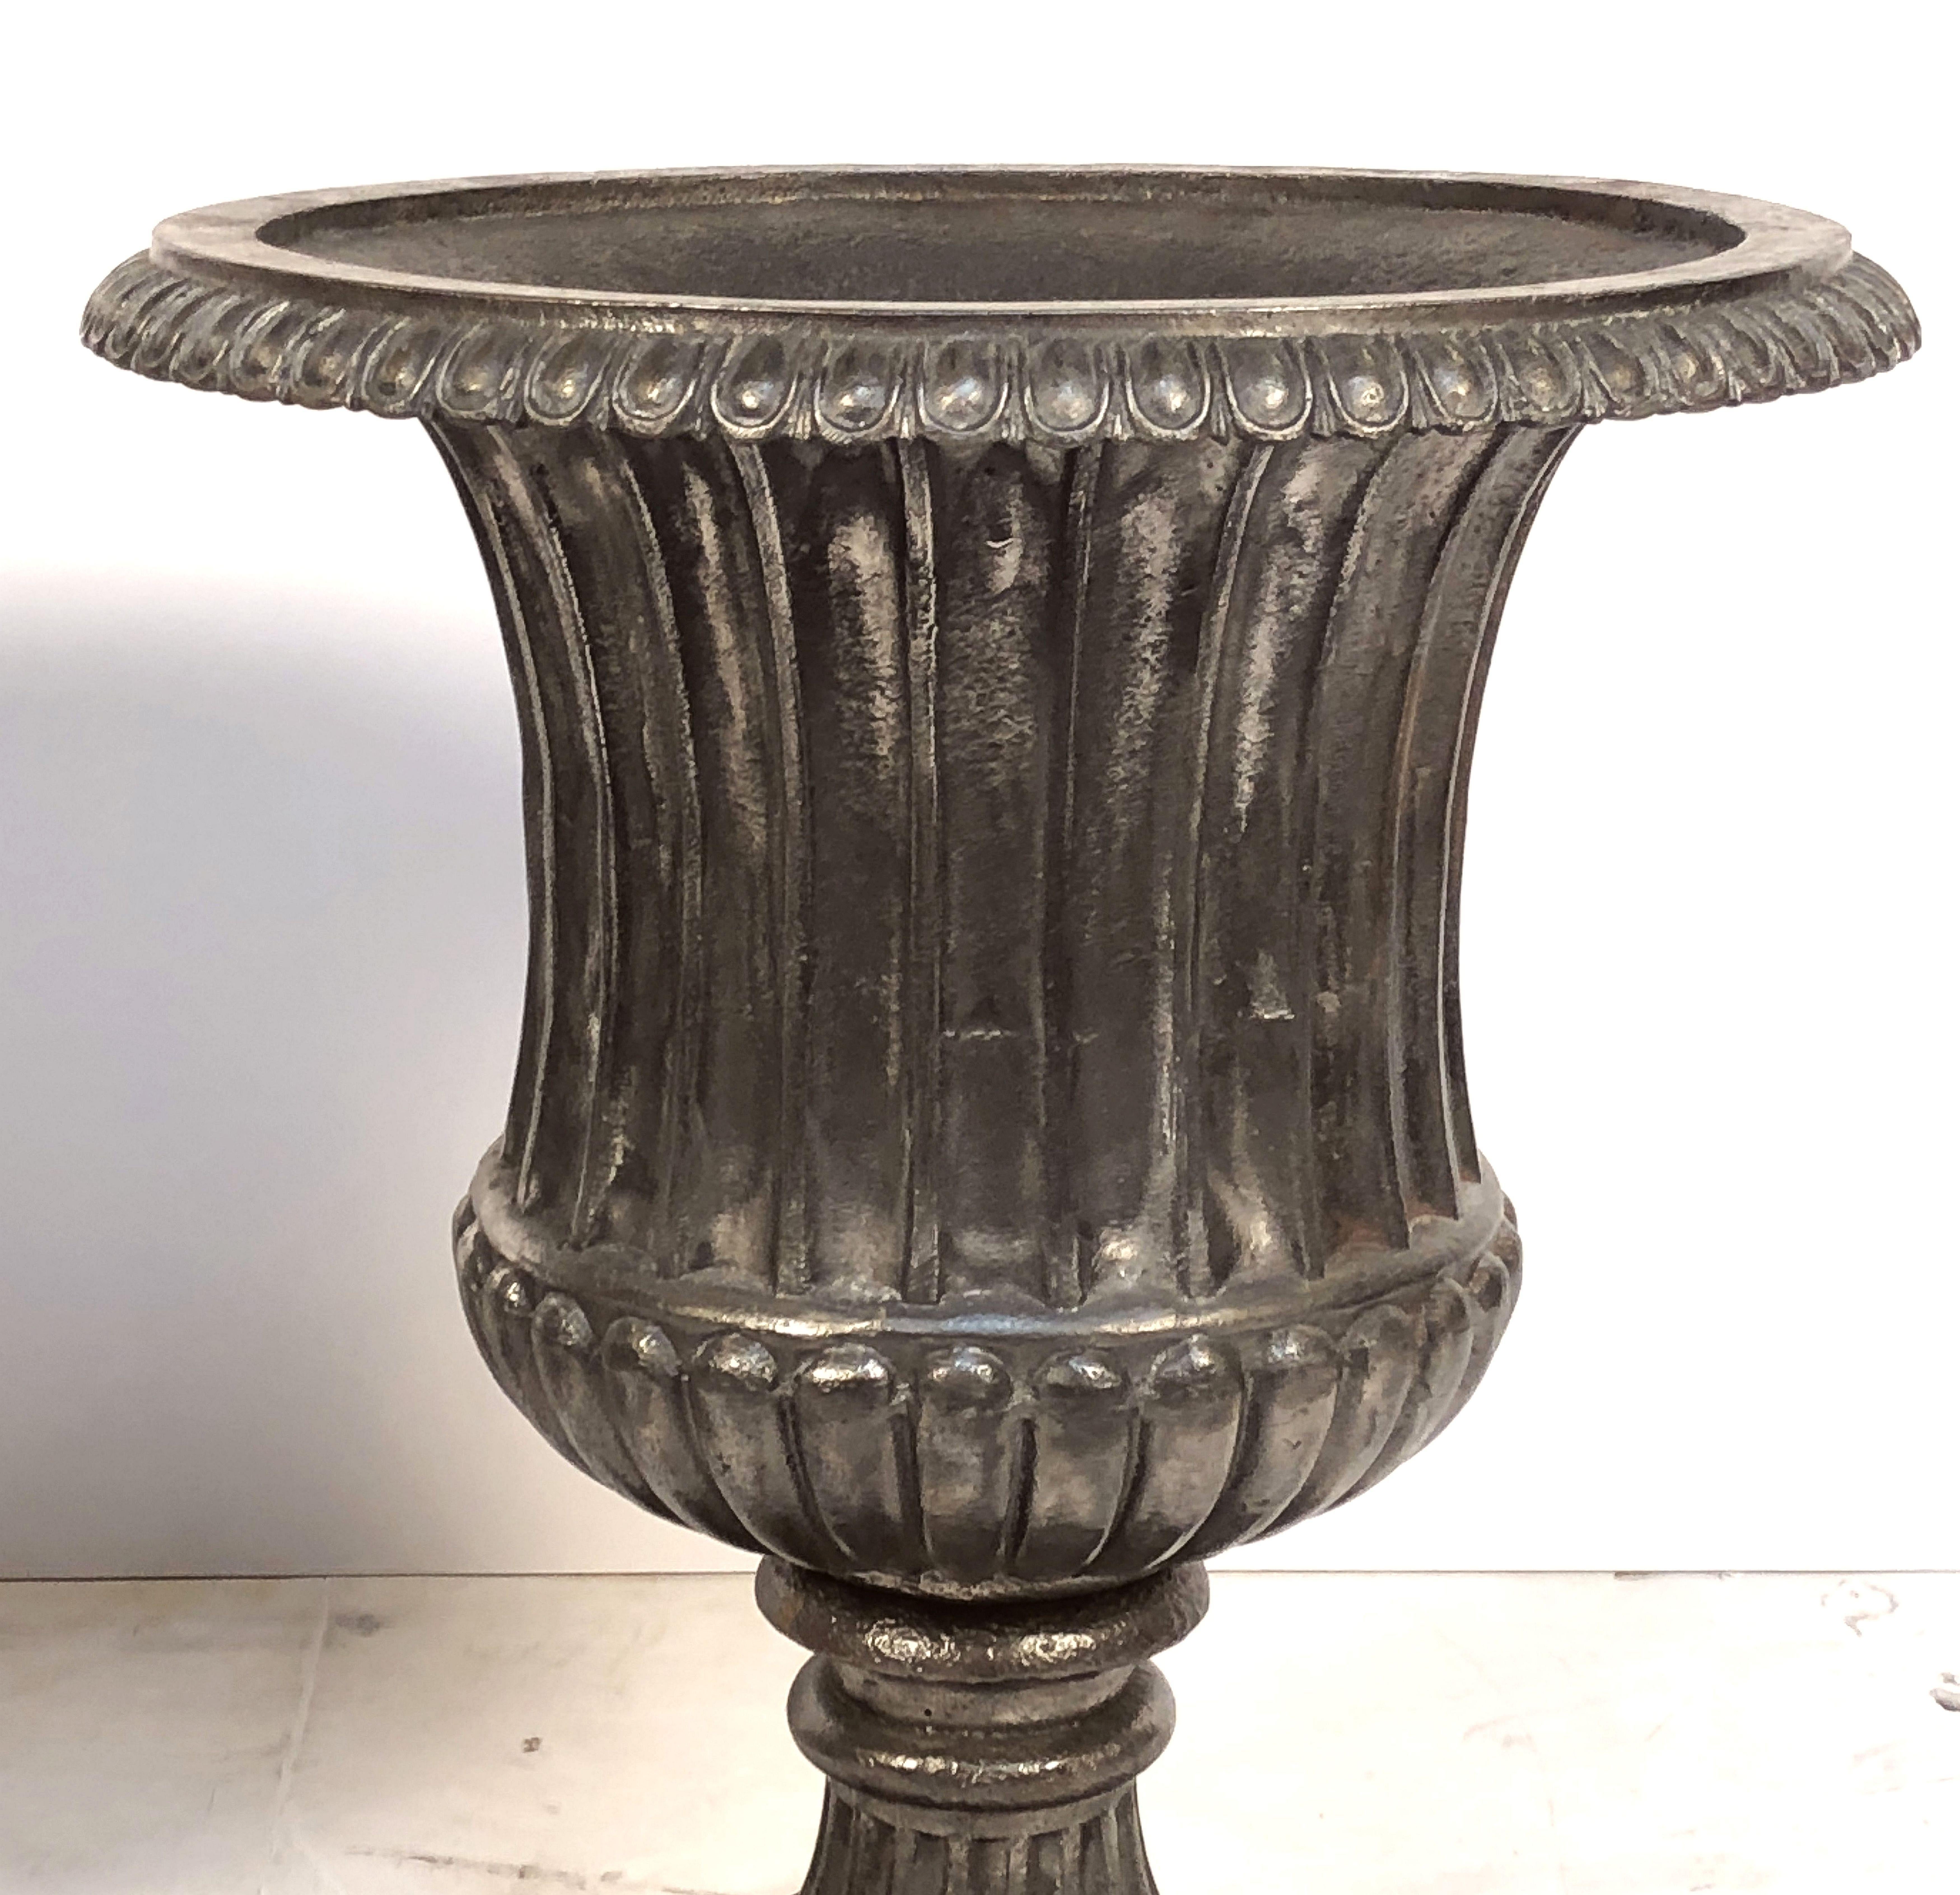 English Garden Urns of Cast Iron with Pewter Finish, 'Individually Priced' 1